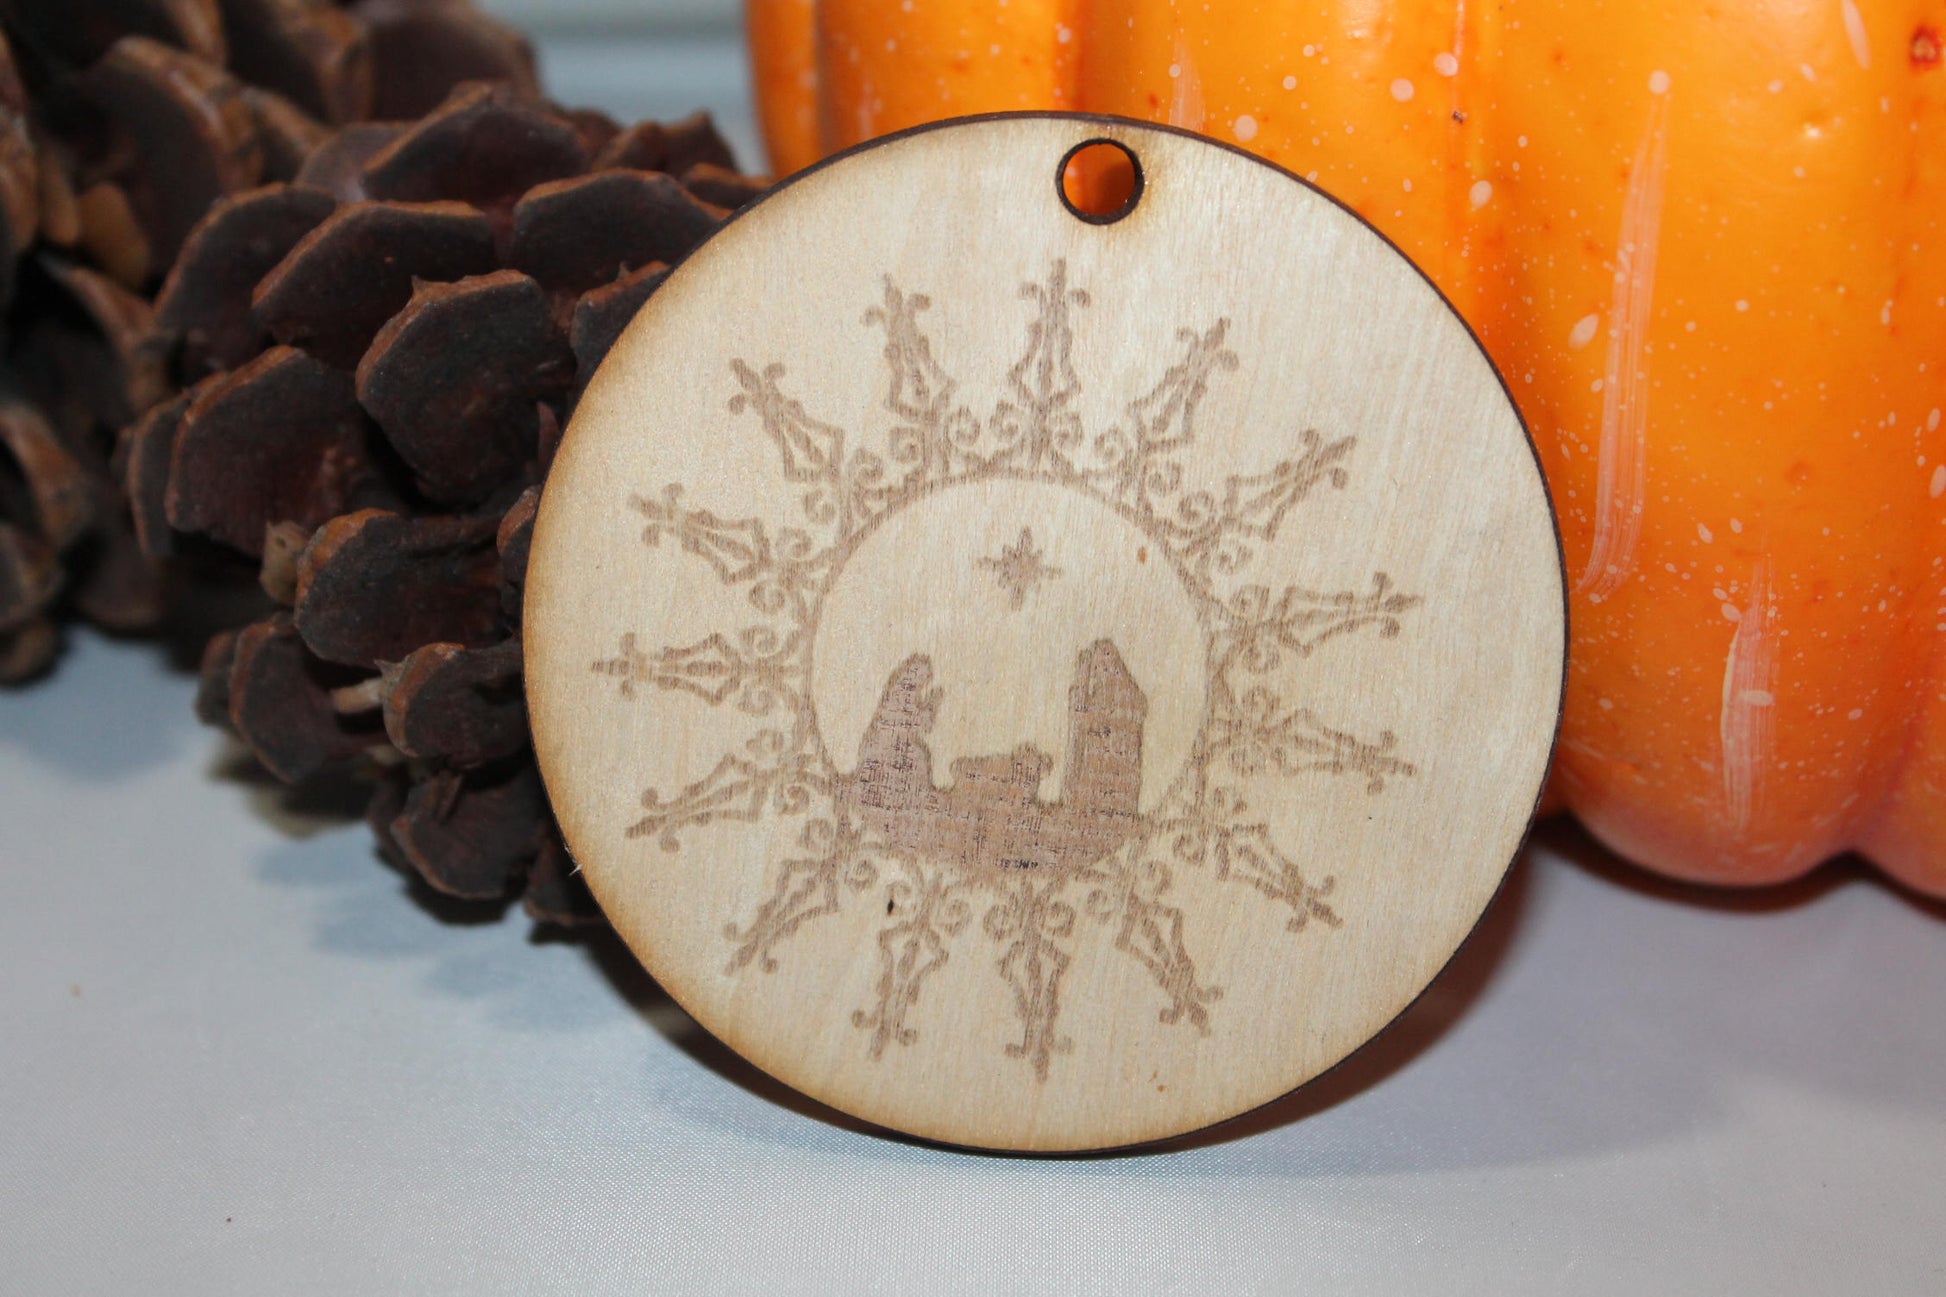 Nativity, Holy Family, Scroll Work, Christmas Ornament, Custom Ornament, Laser Engraved, Wood Cut Out, Footstepsinthepast